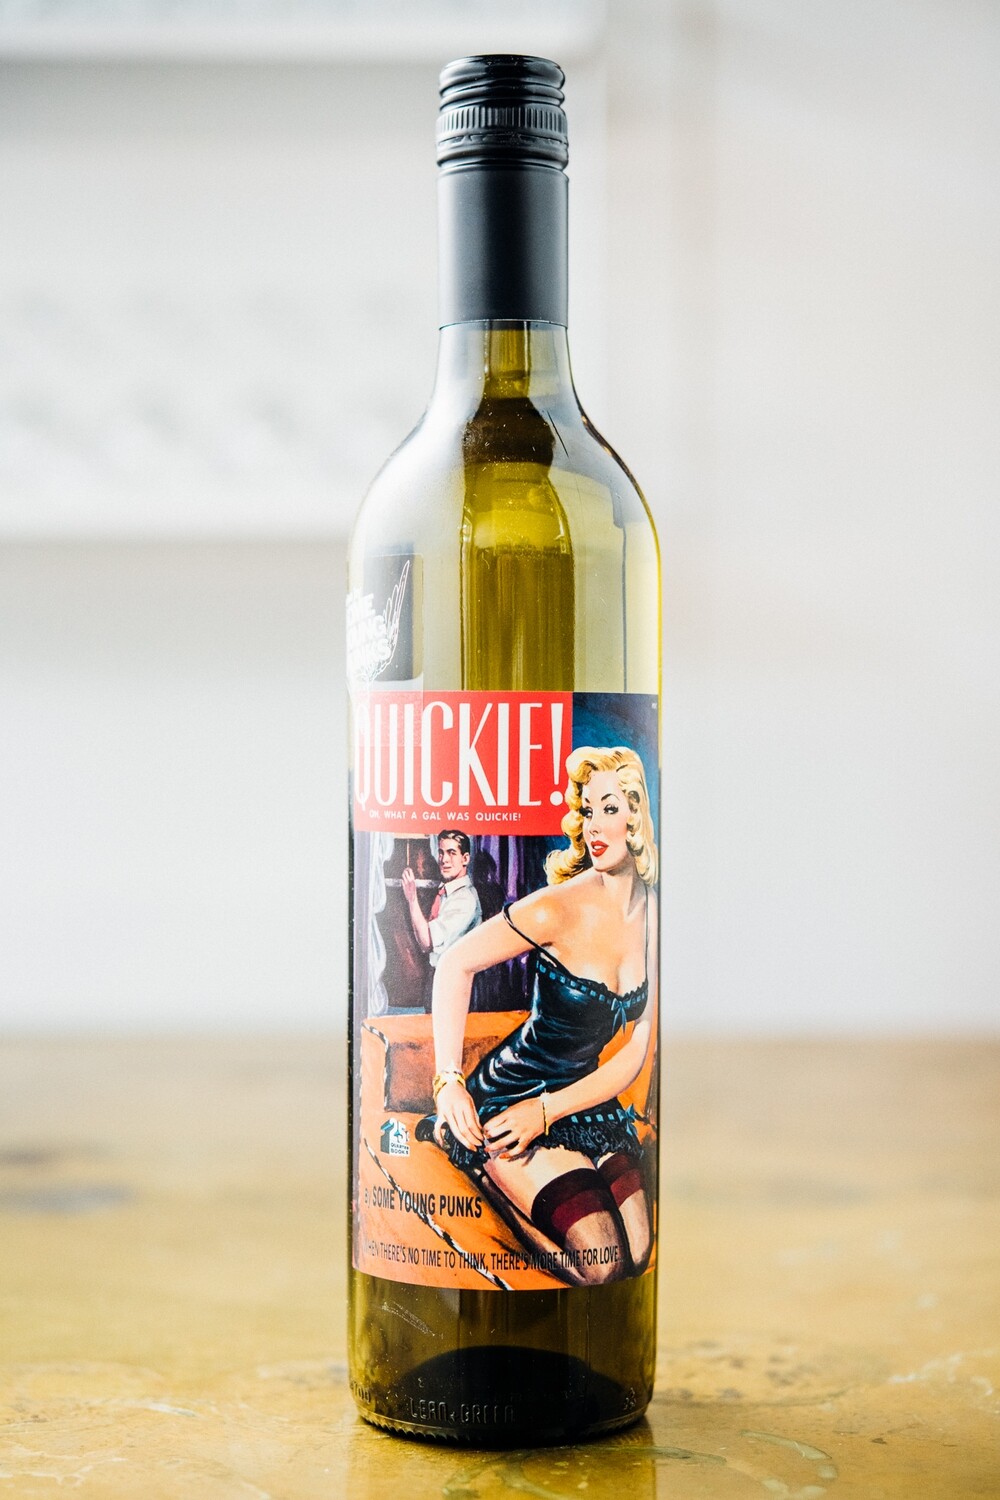 Some Young Punks 'Quickie!' Sauvignon Blanc (2018)